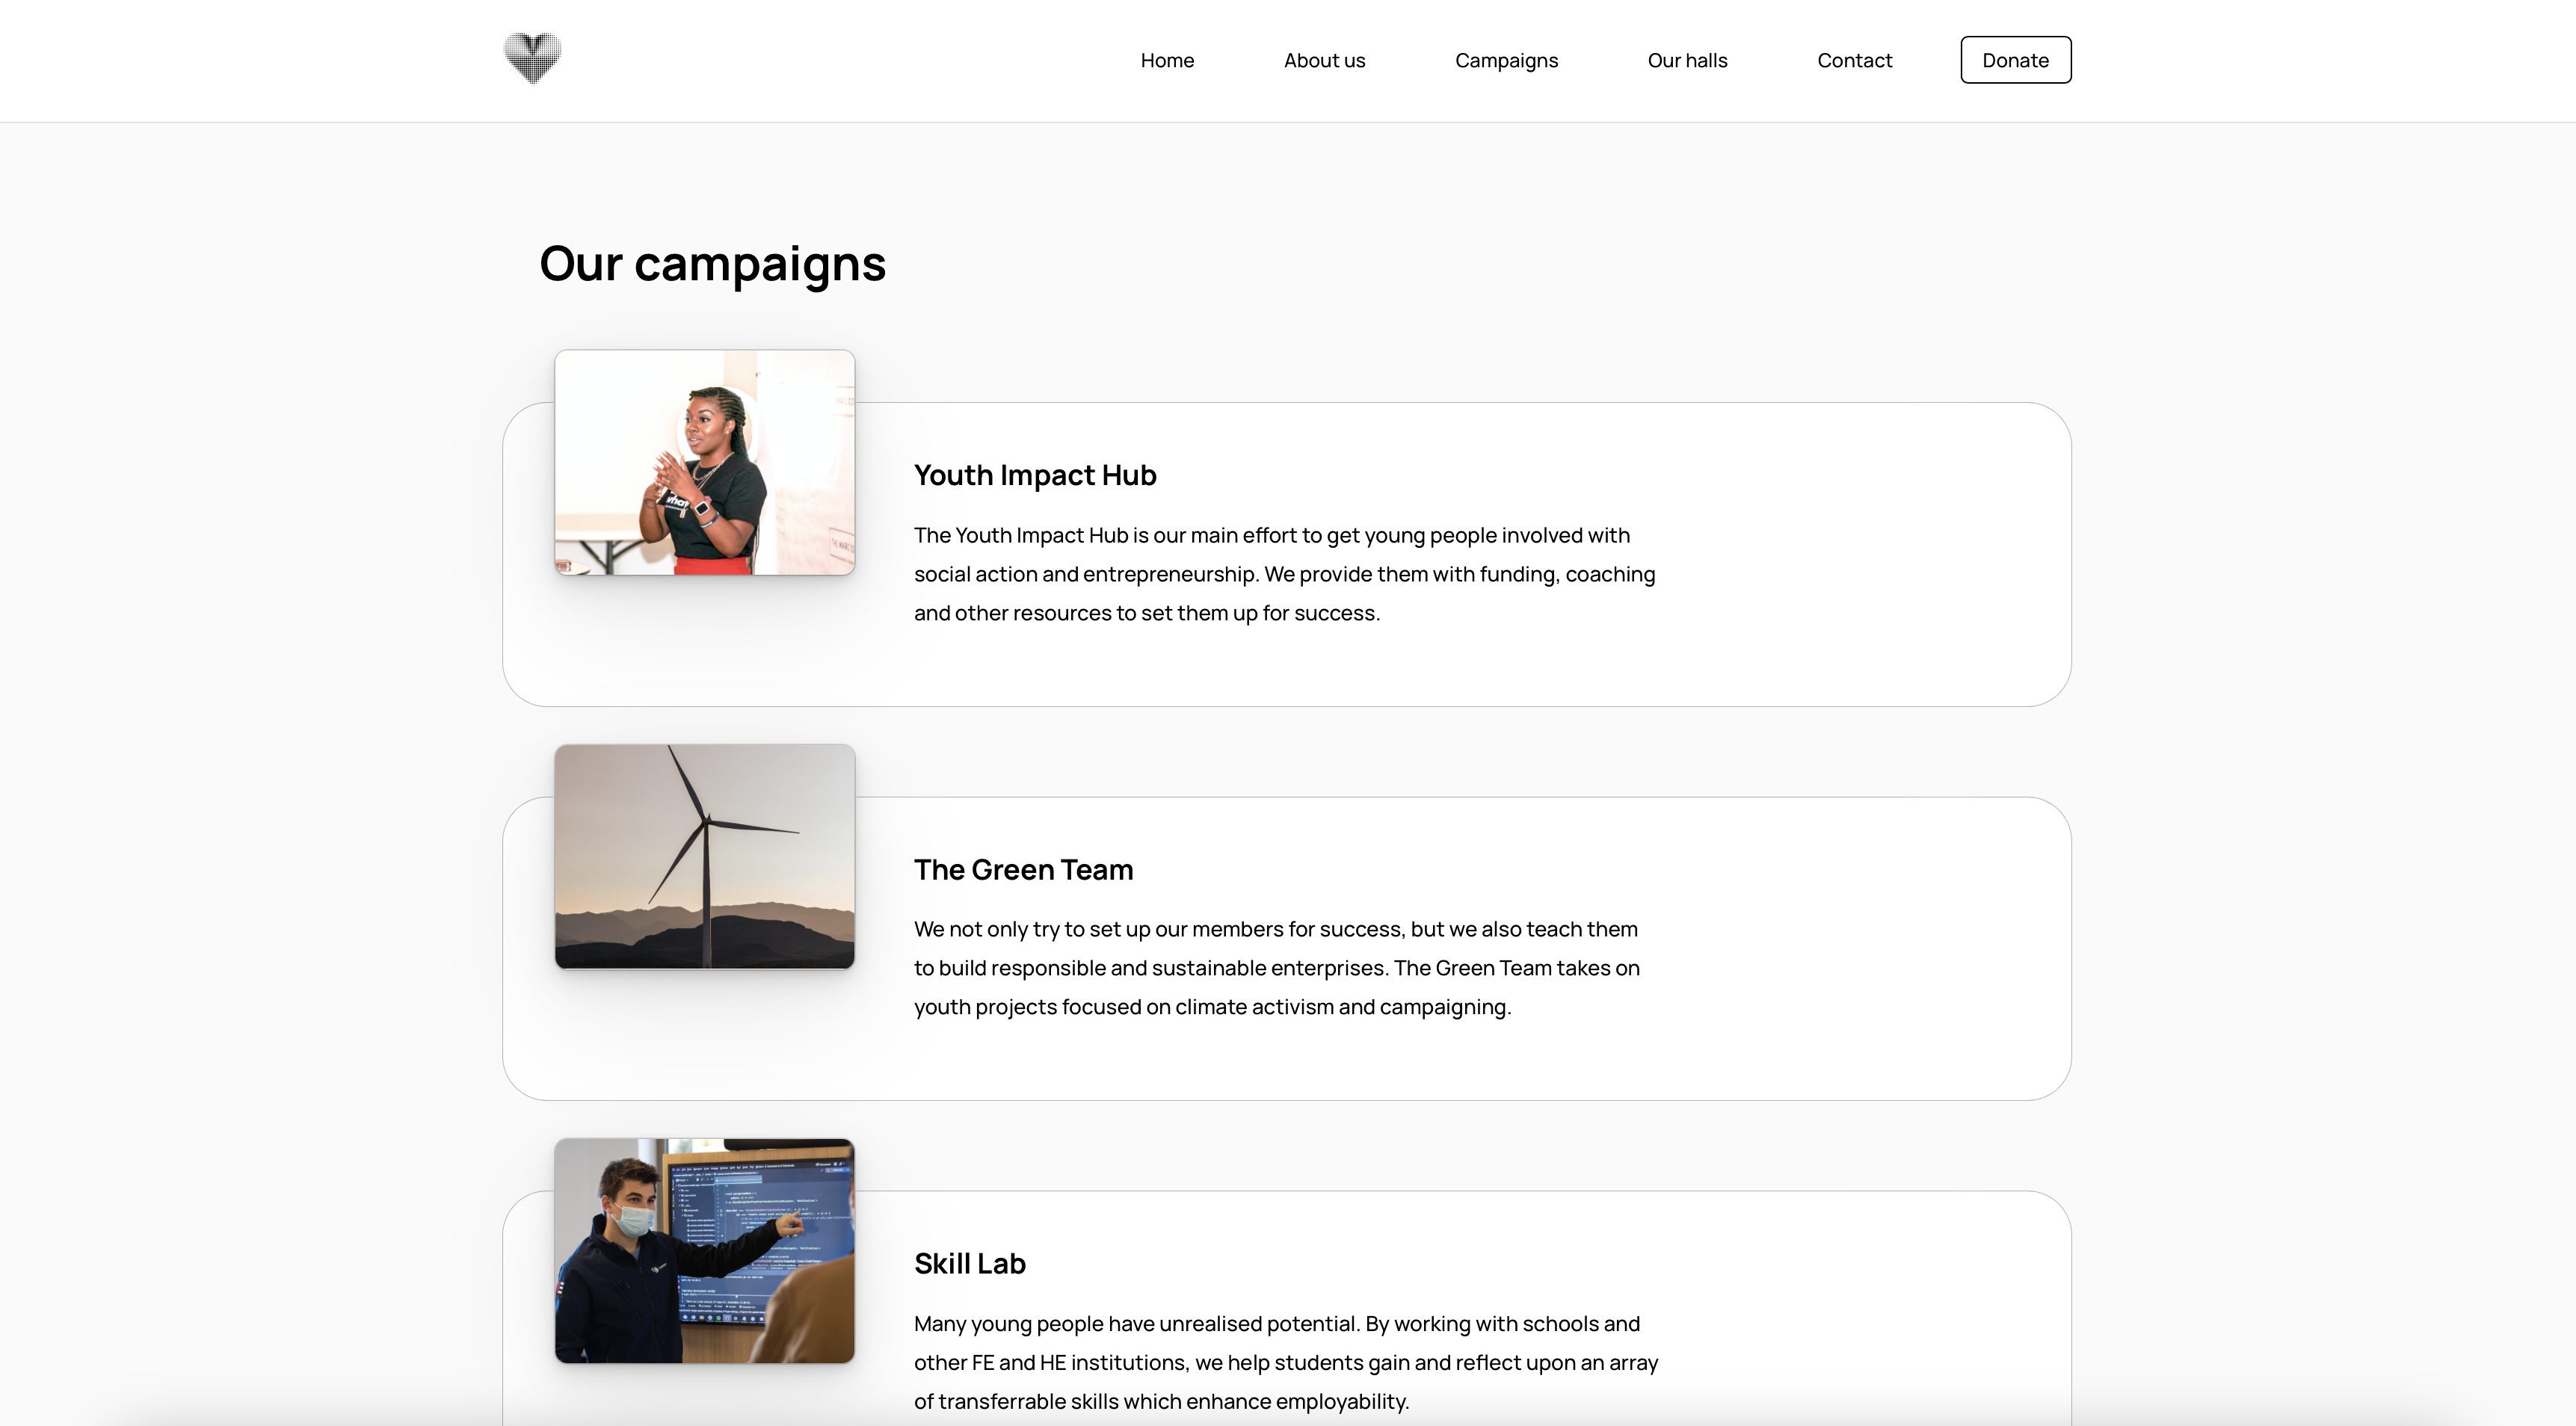 Campaigns page